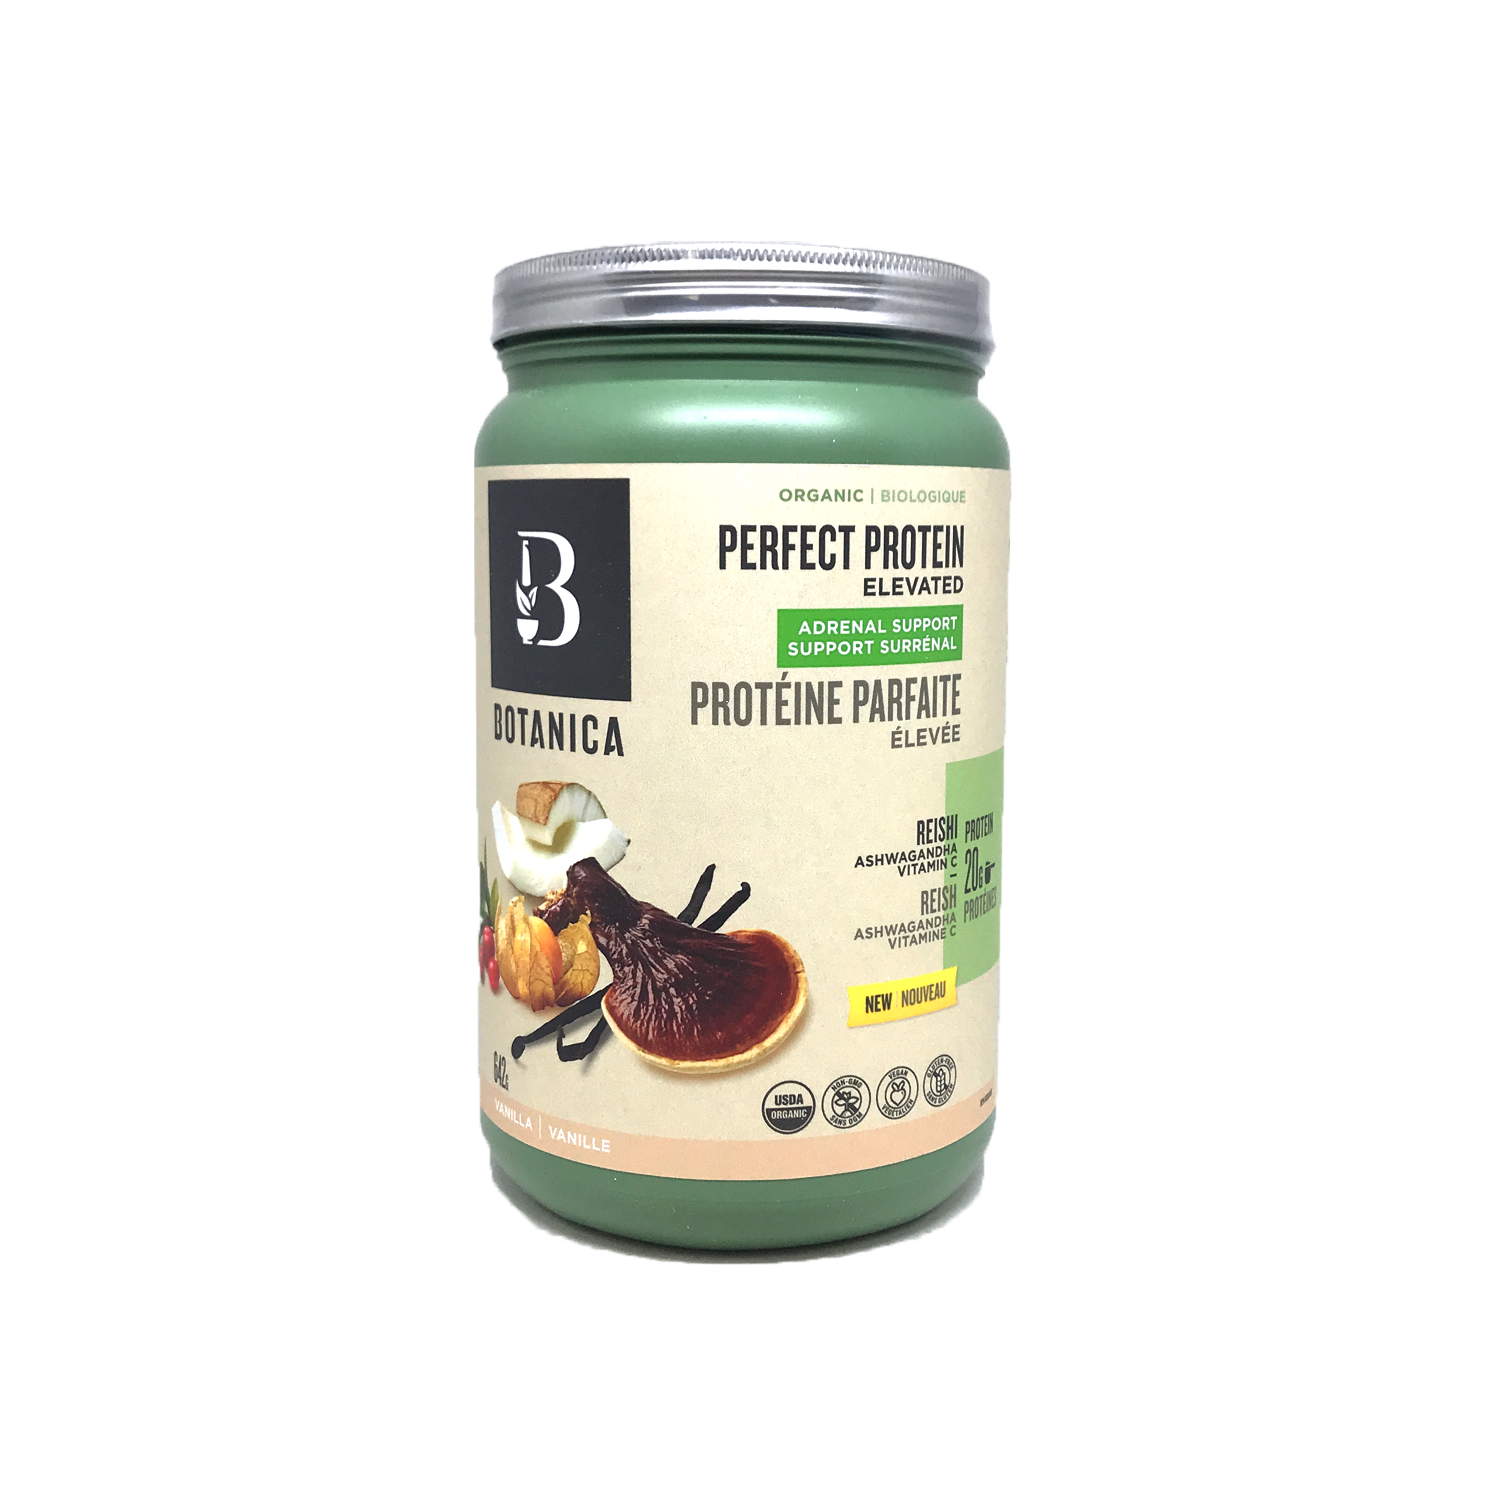 Botanica Organic Perfect Protein Elevated Adrenal Support Vanilla 642g